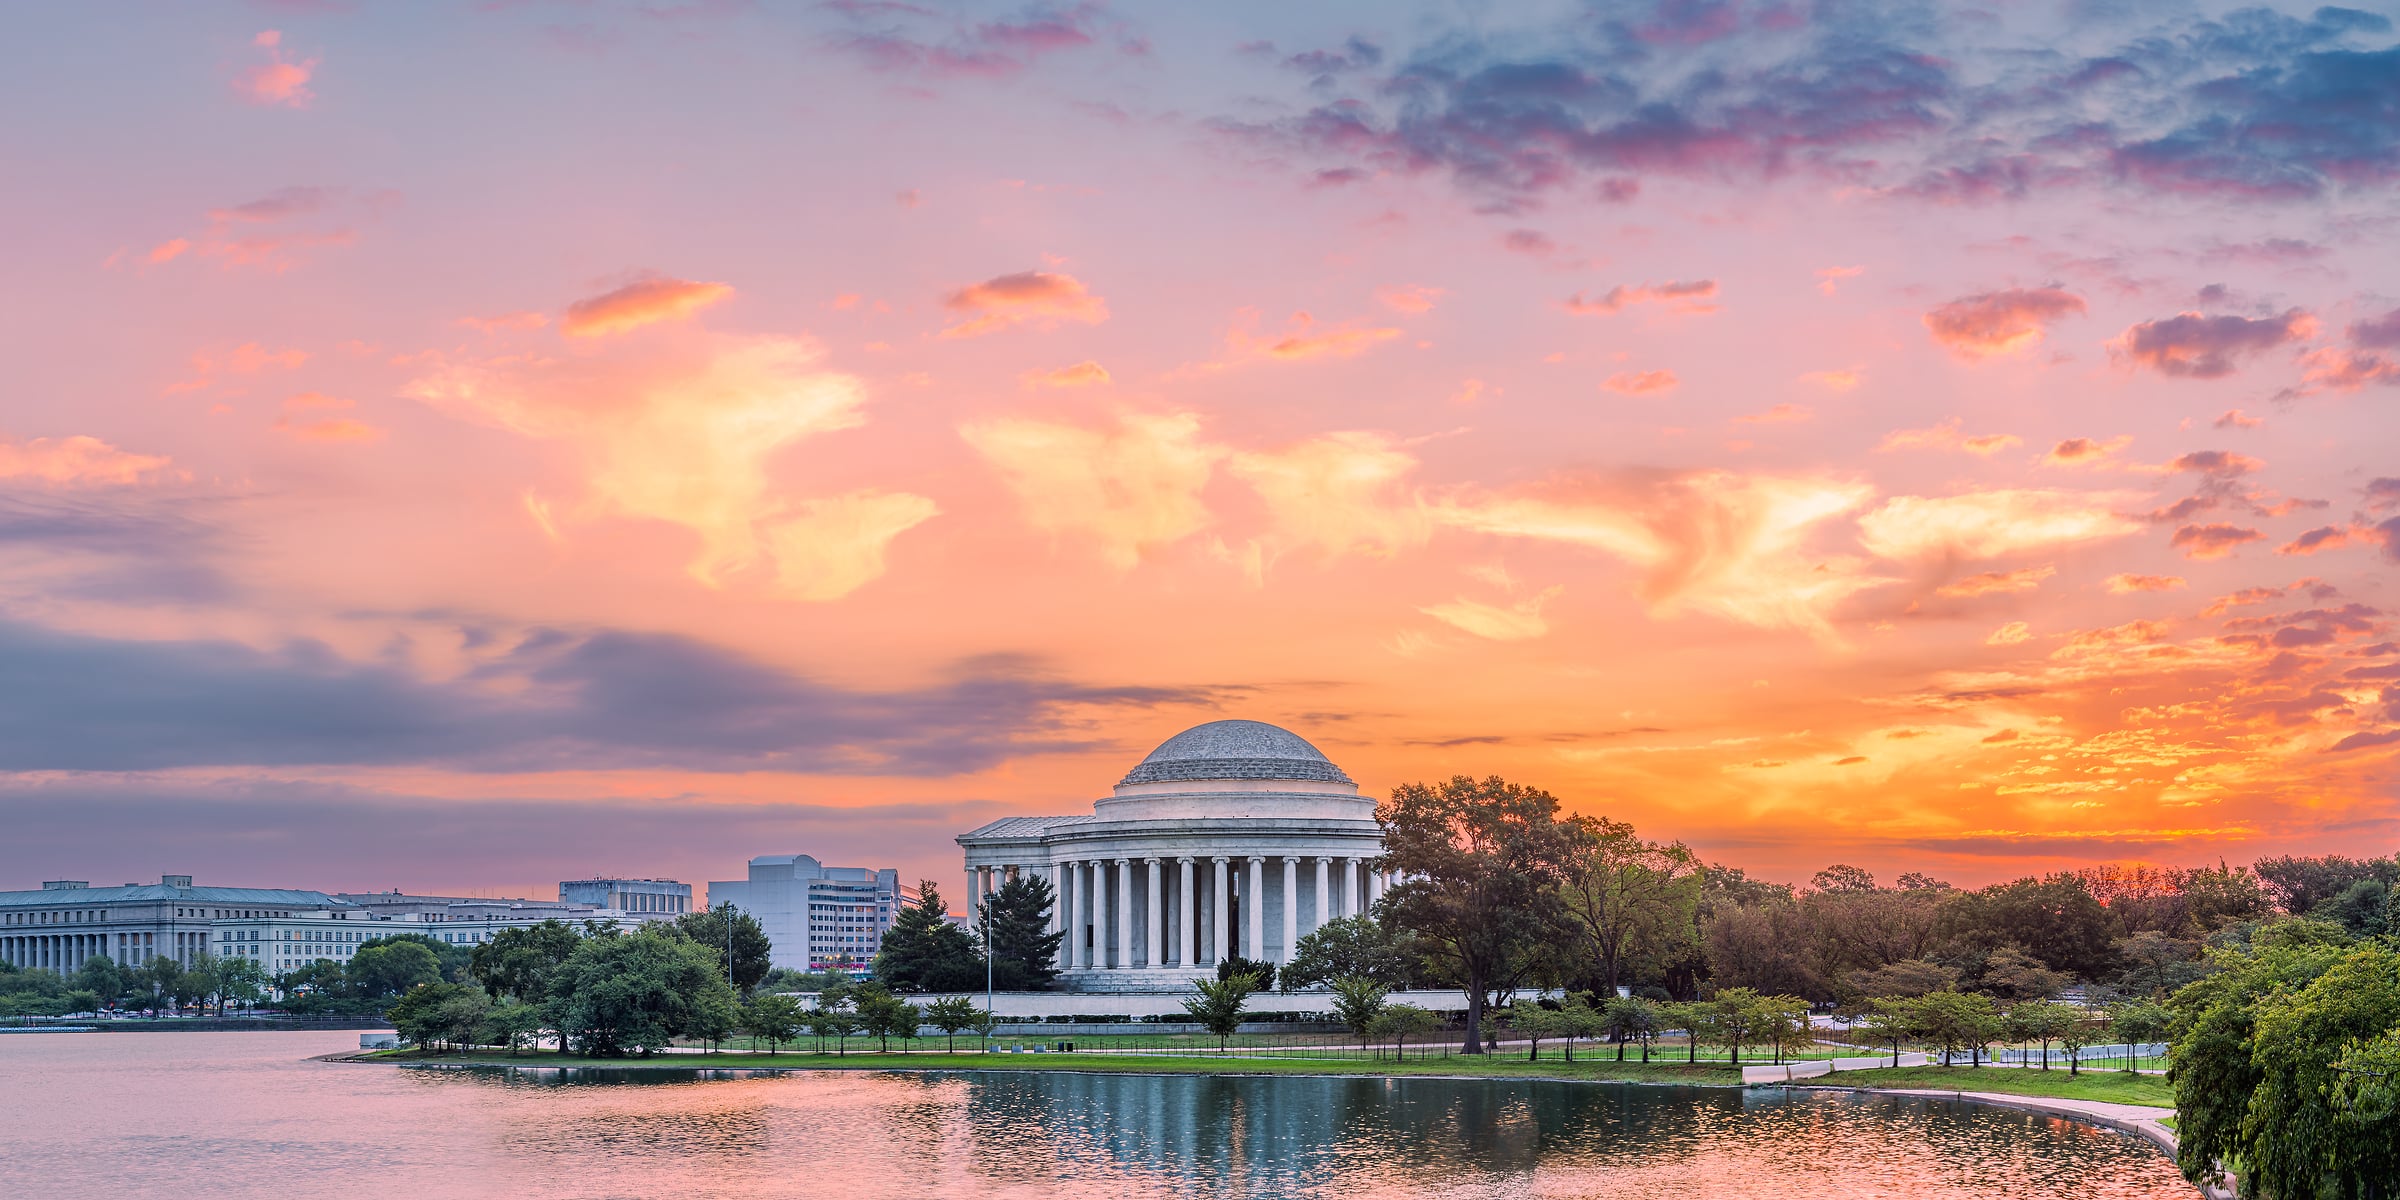 159 megapixels! A very high resolution, large-format VAST photo print of the Jefferson Memorial and the Tidal Basin at sunrise; photograph created by Tim Lo Monaco at the The National Mall, Washington, D.C.